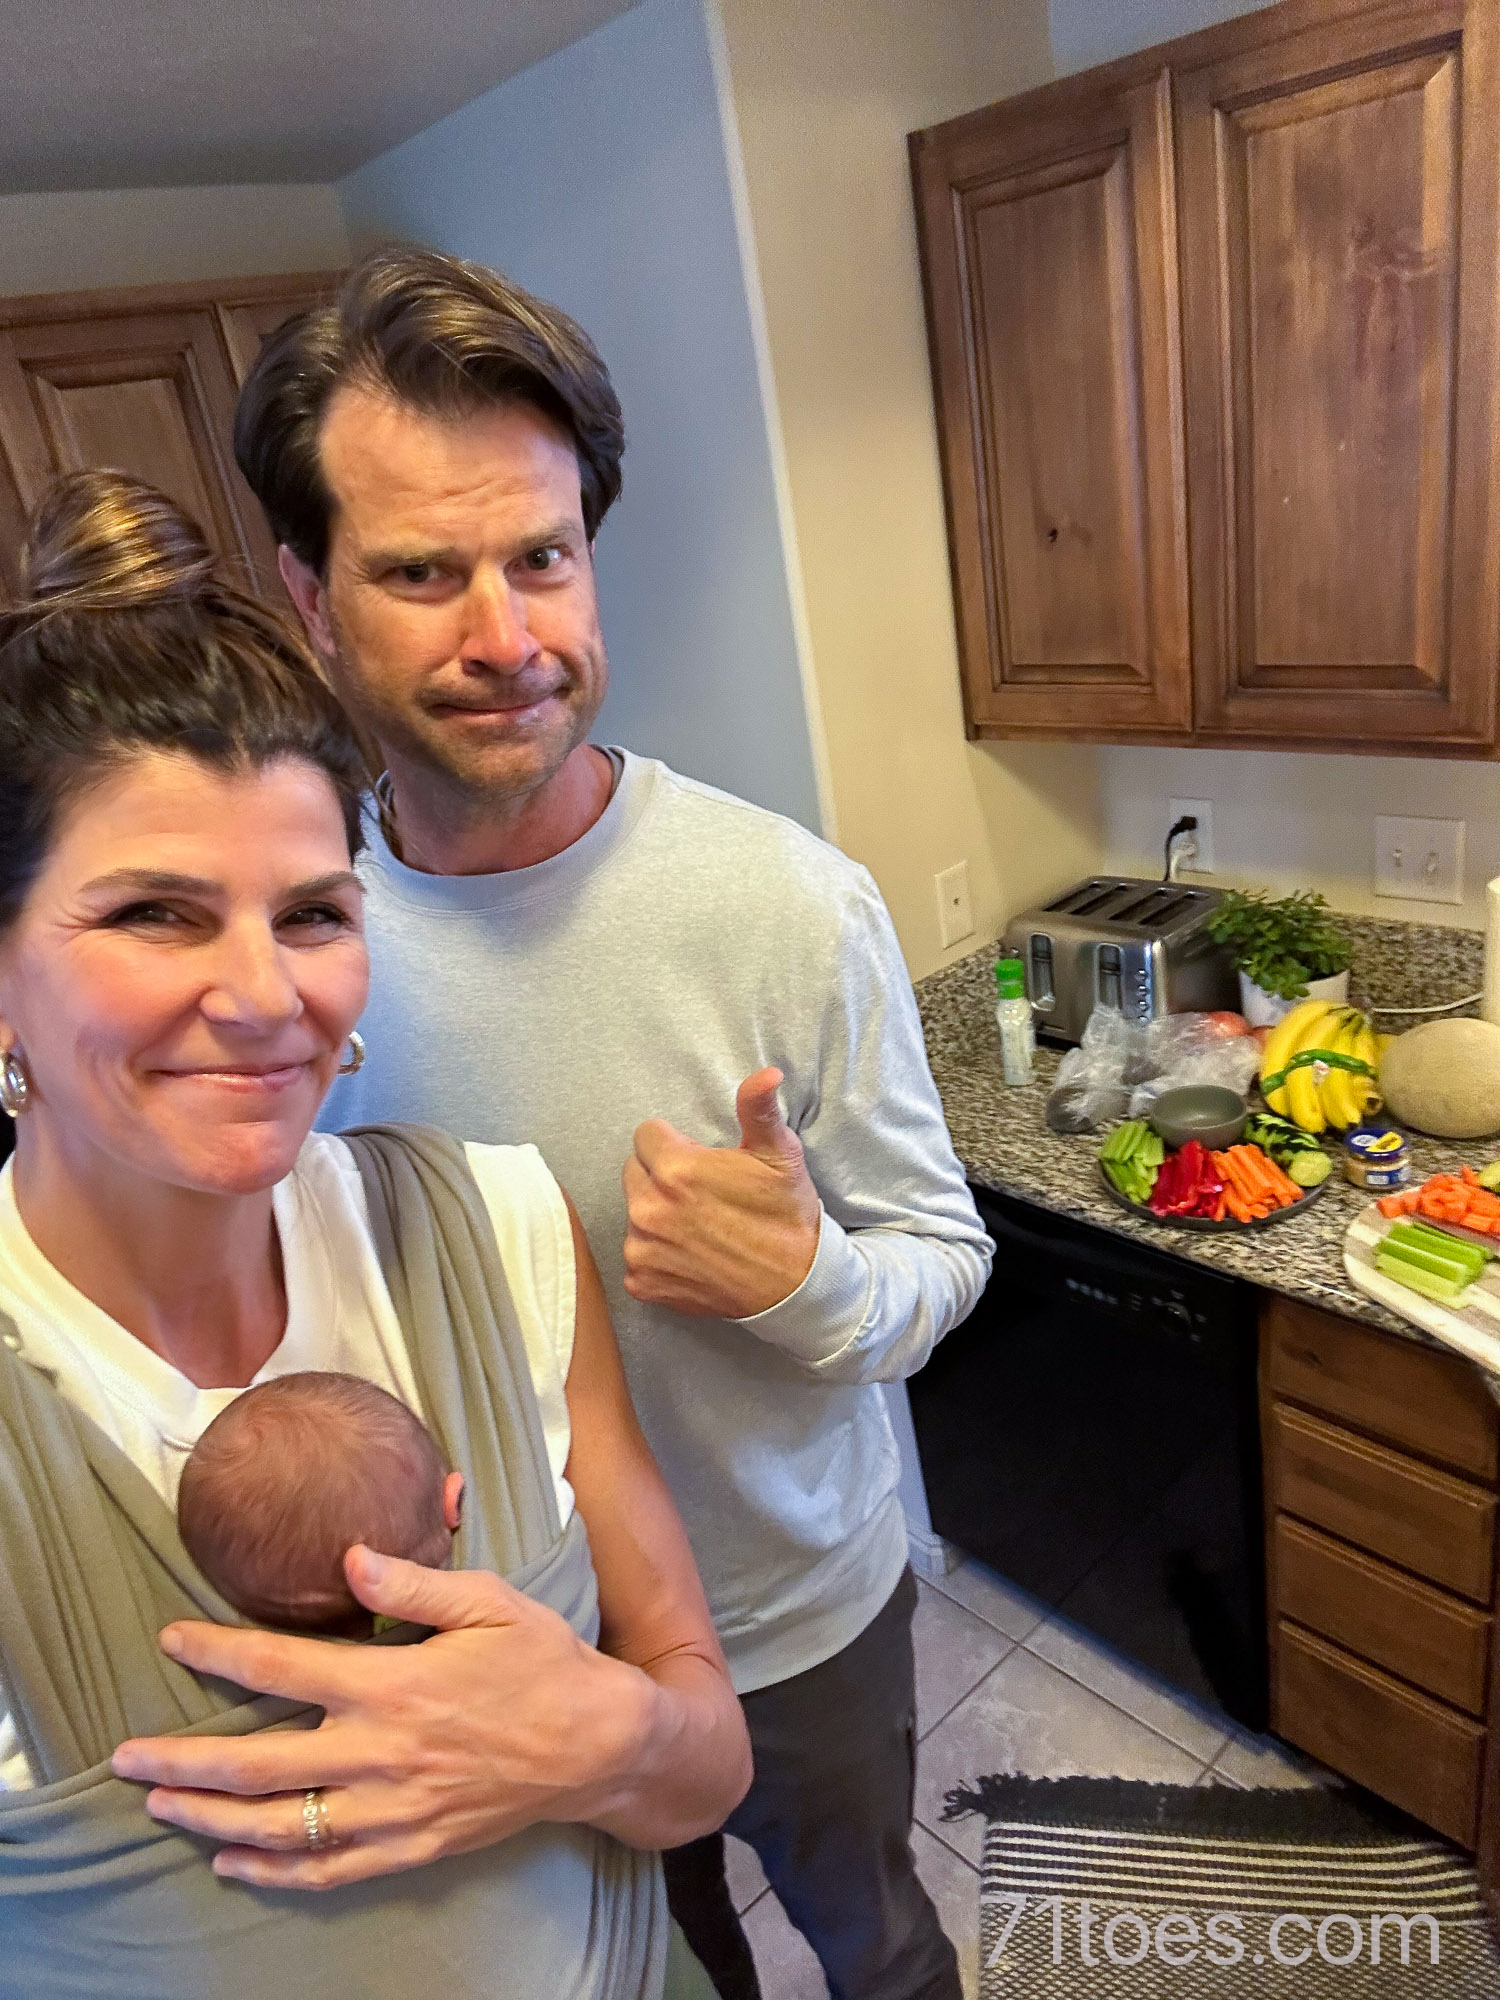 grandparents making dinner with grand-baby strapped on